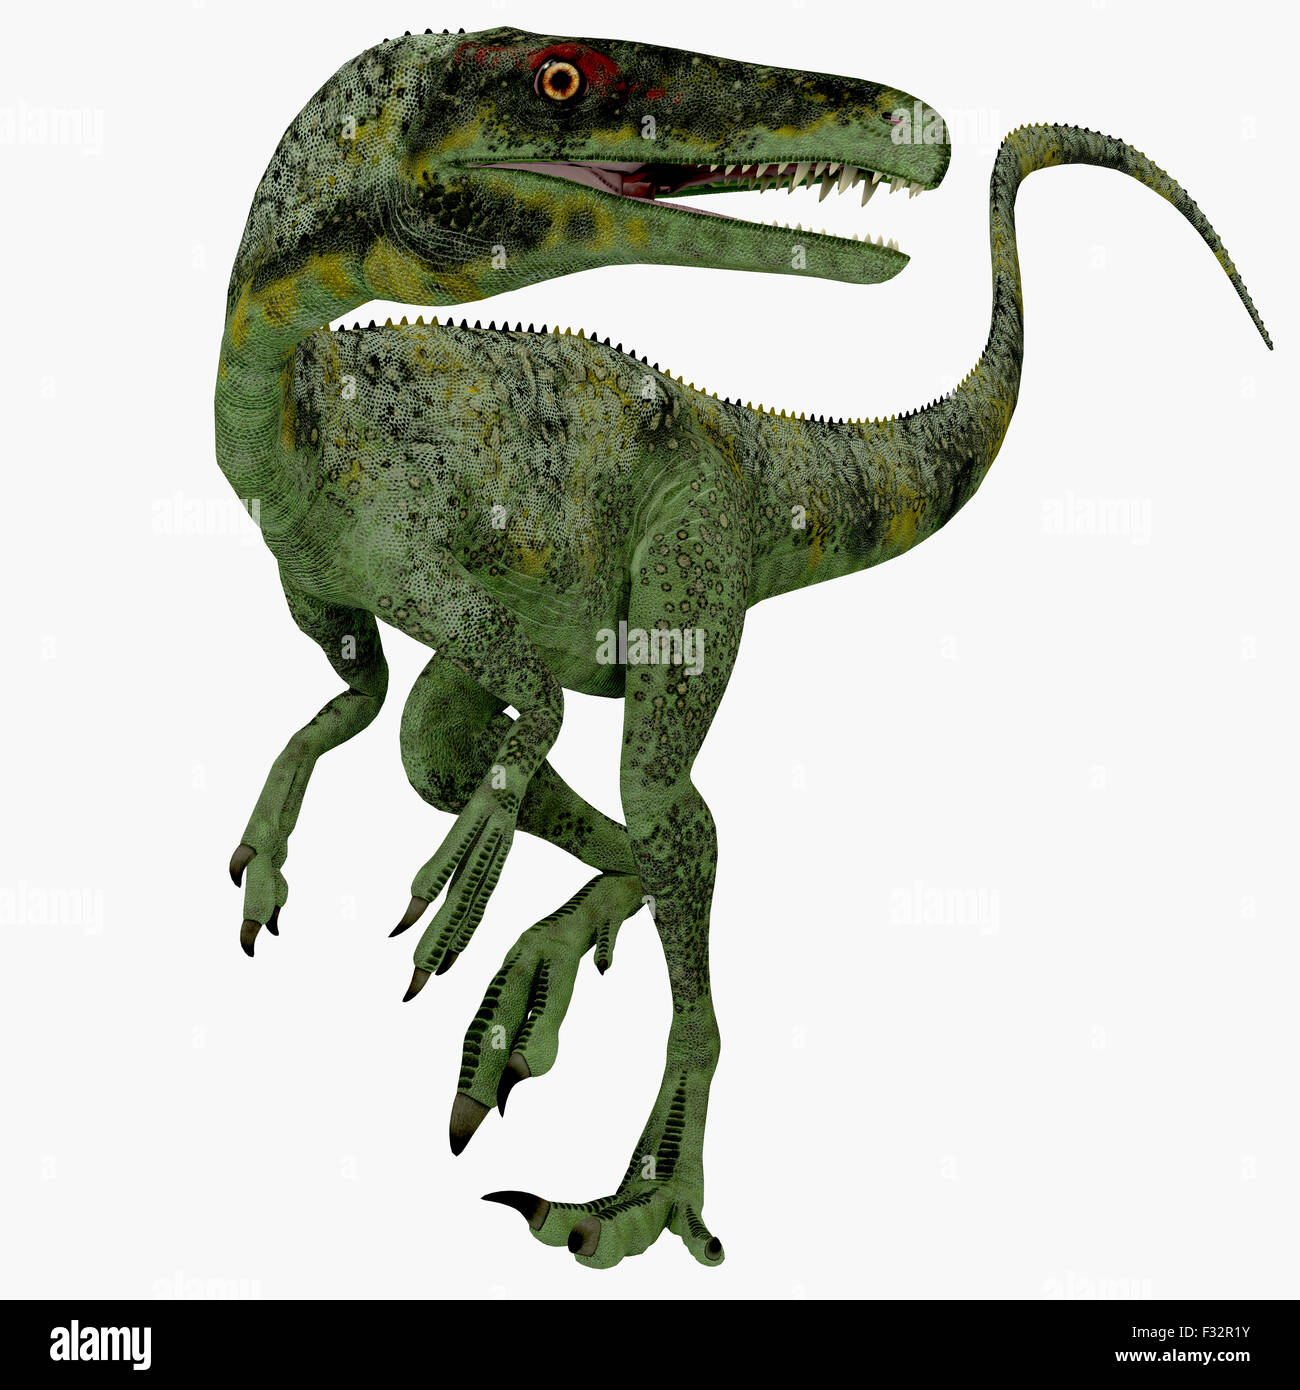 Juravenator was a small carnivorous dinosaur that lived in Germany during the Jurassic Period. Stock Photo